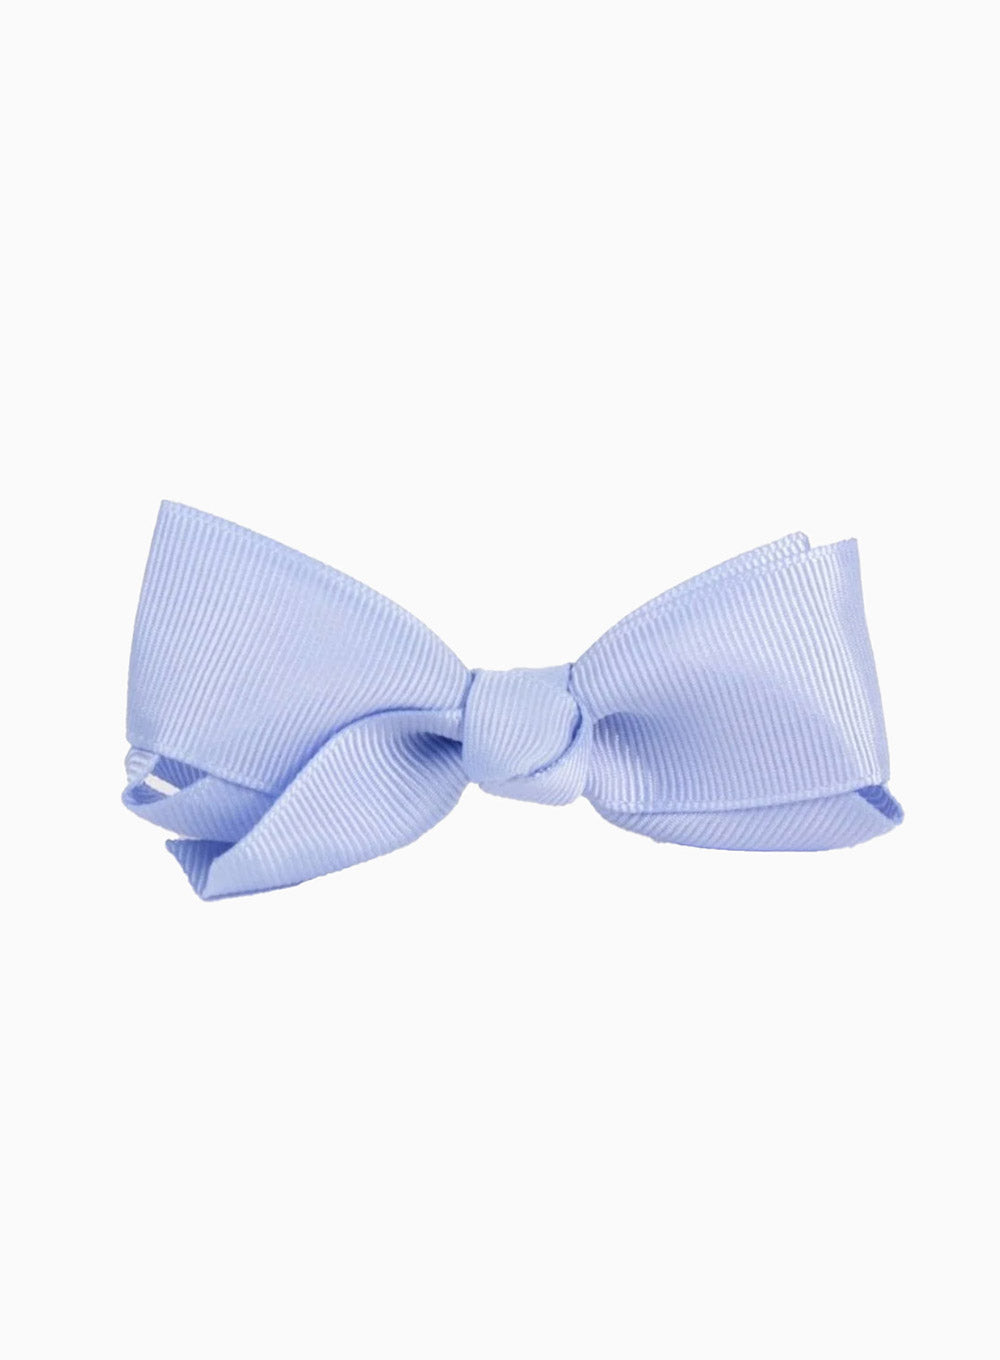 Large Bow Hair Clip in Bluebell